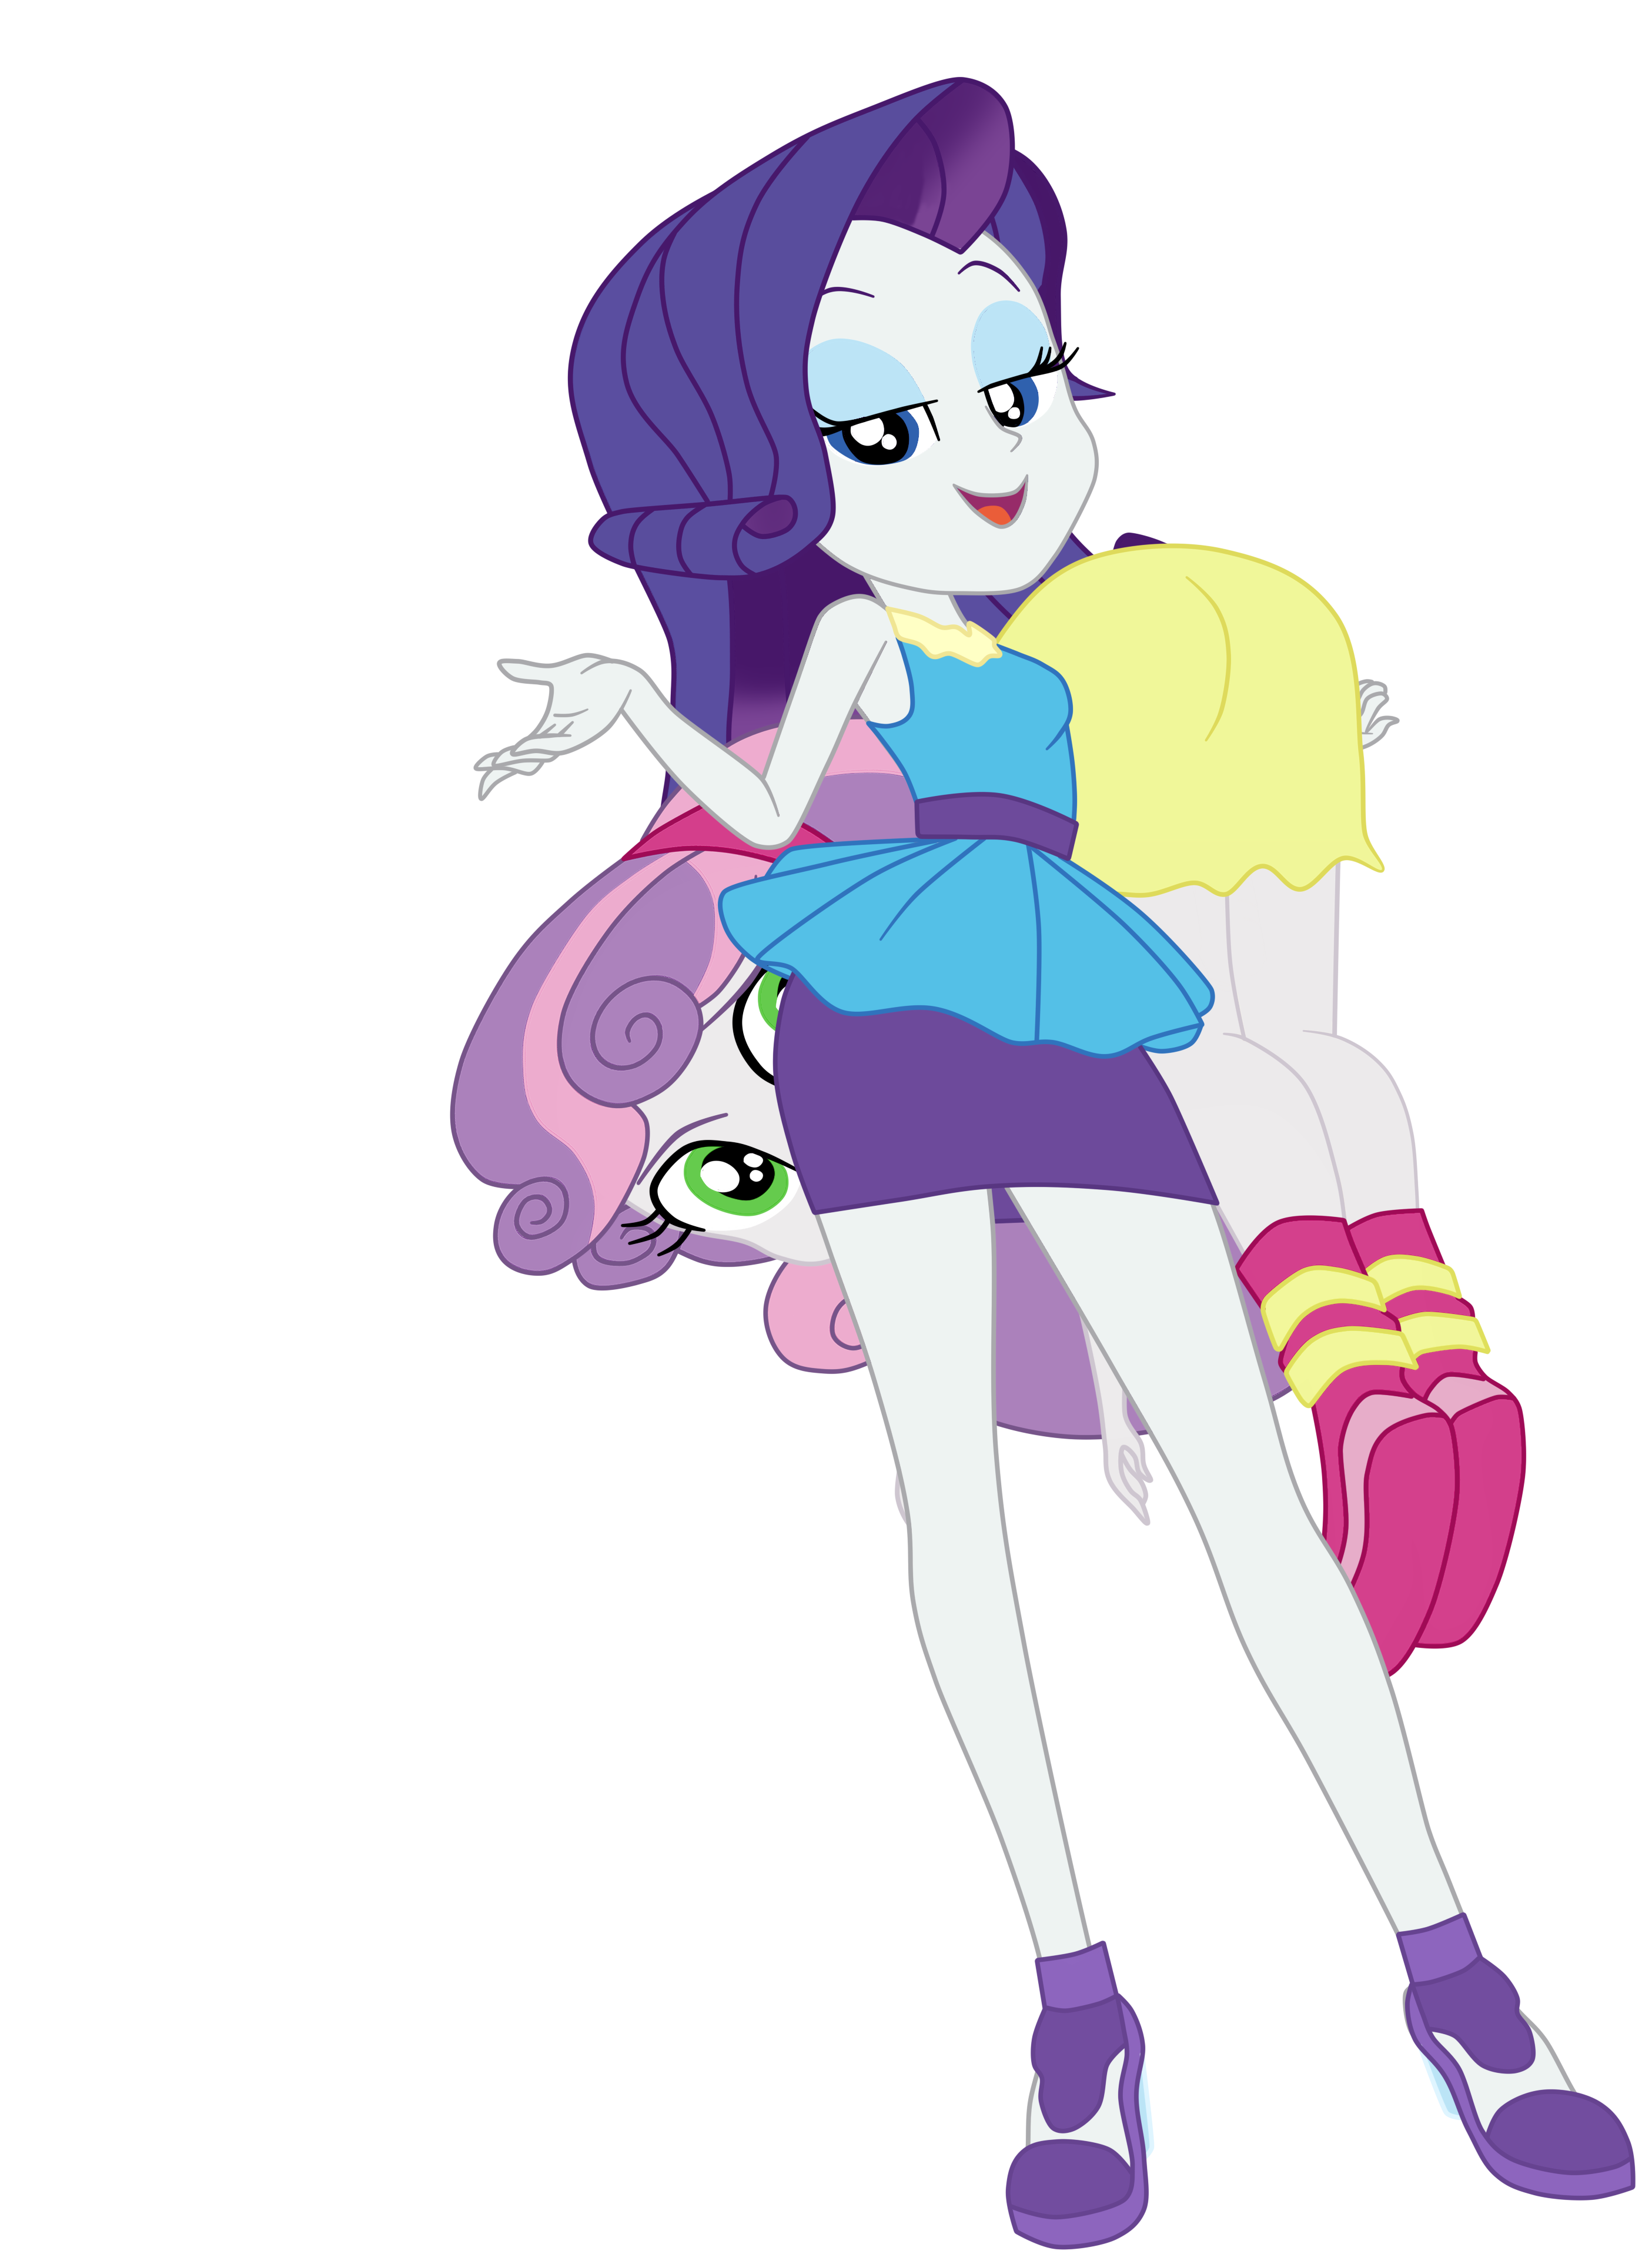 Rarity Cargando A Sweetie Belle 2 by gmaplay on DeviantArt